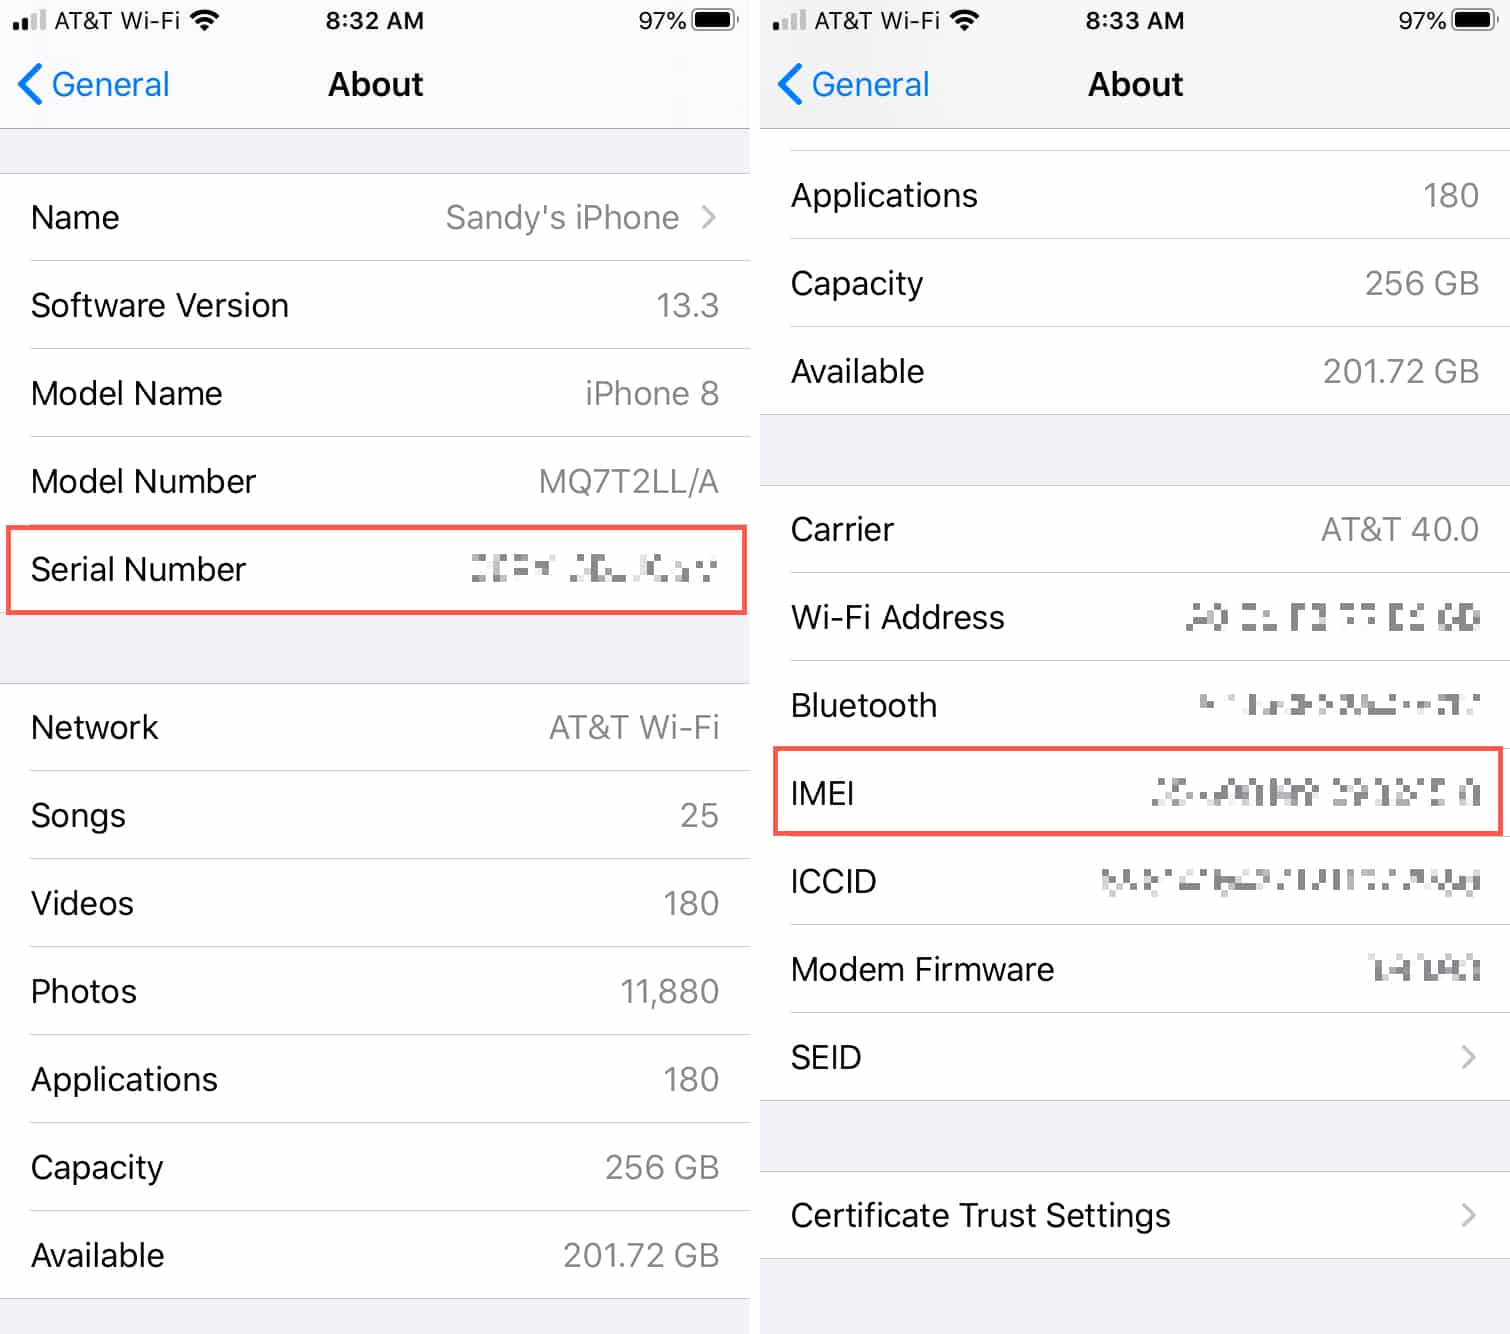 New to iPhone? 6 ways to find your serial number and IMEI